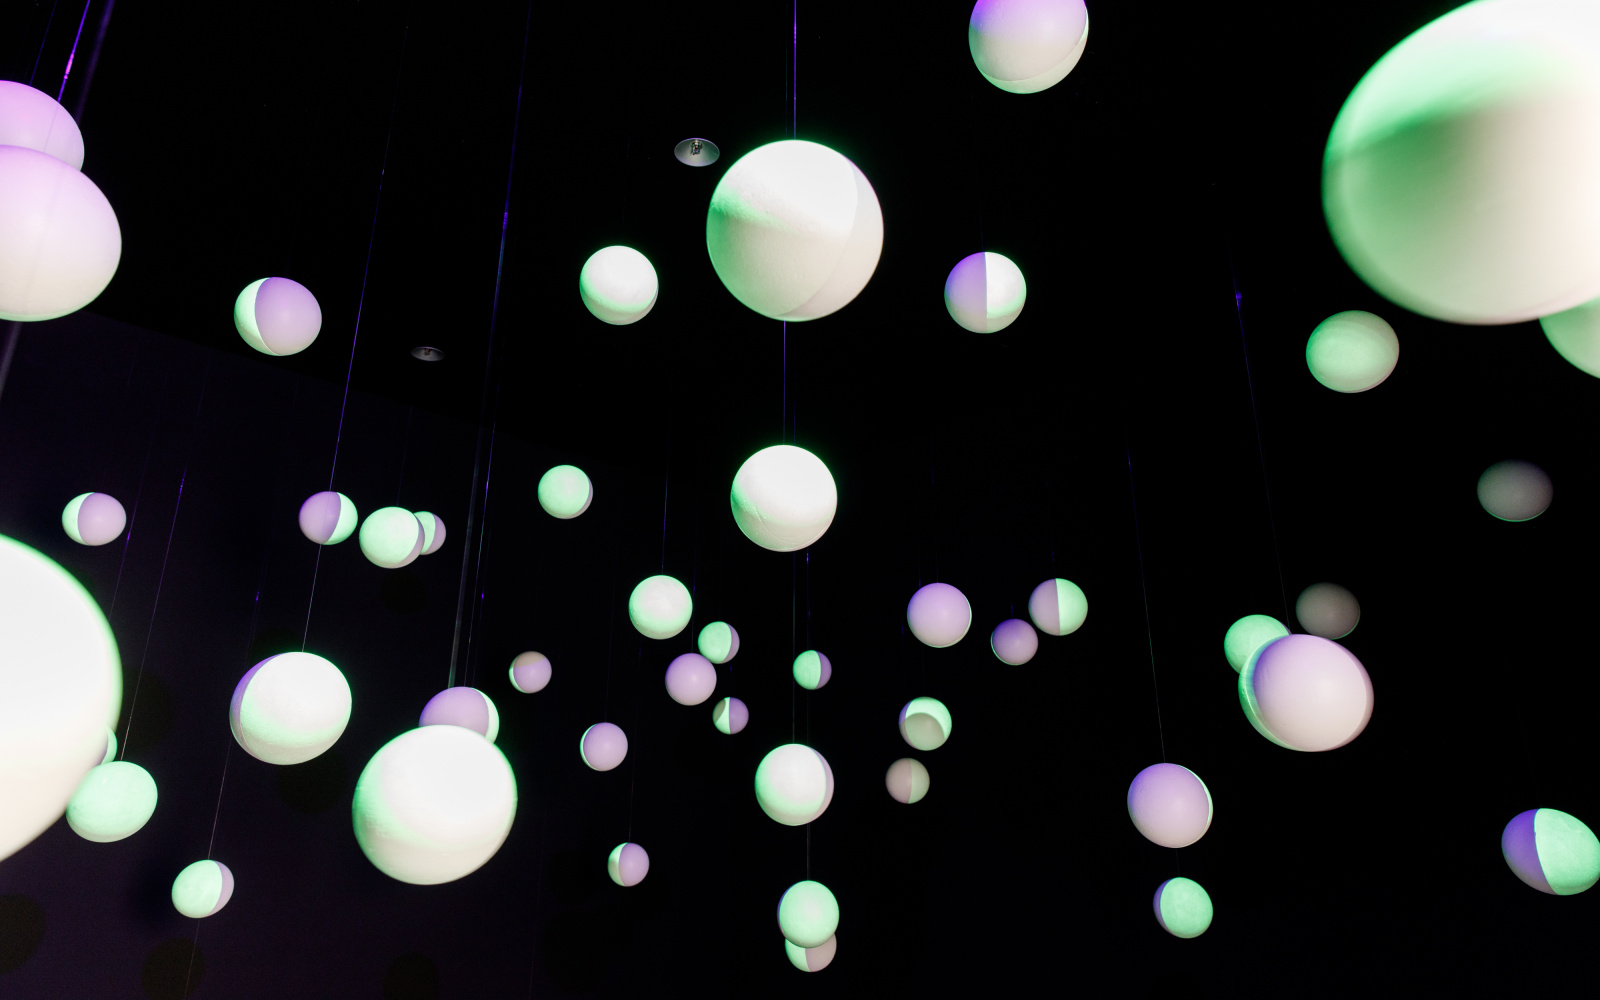 White polystyrene balls hang in a black room, the balls are painted with fluorescent paint and are illuminated.